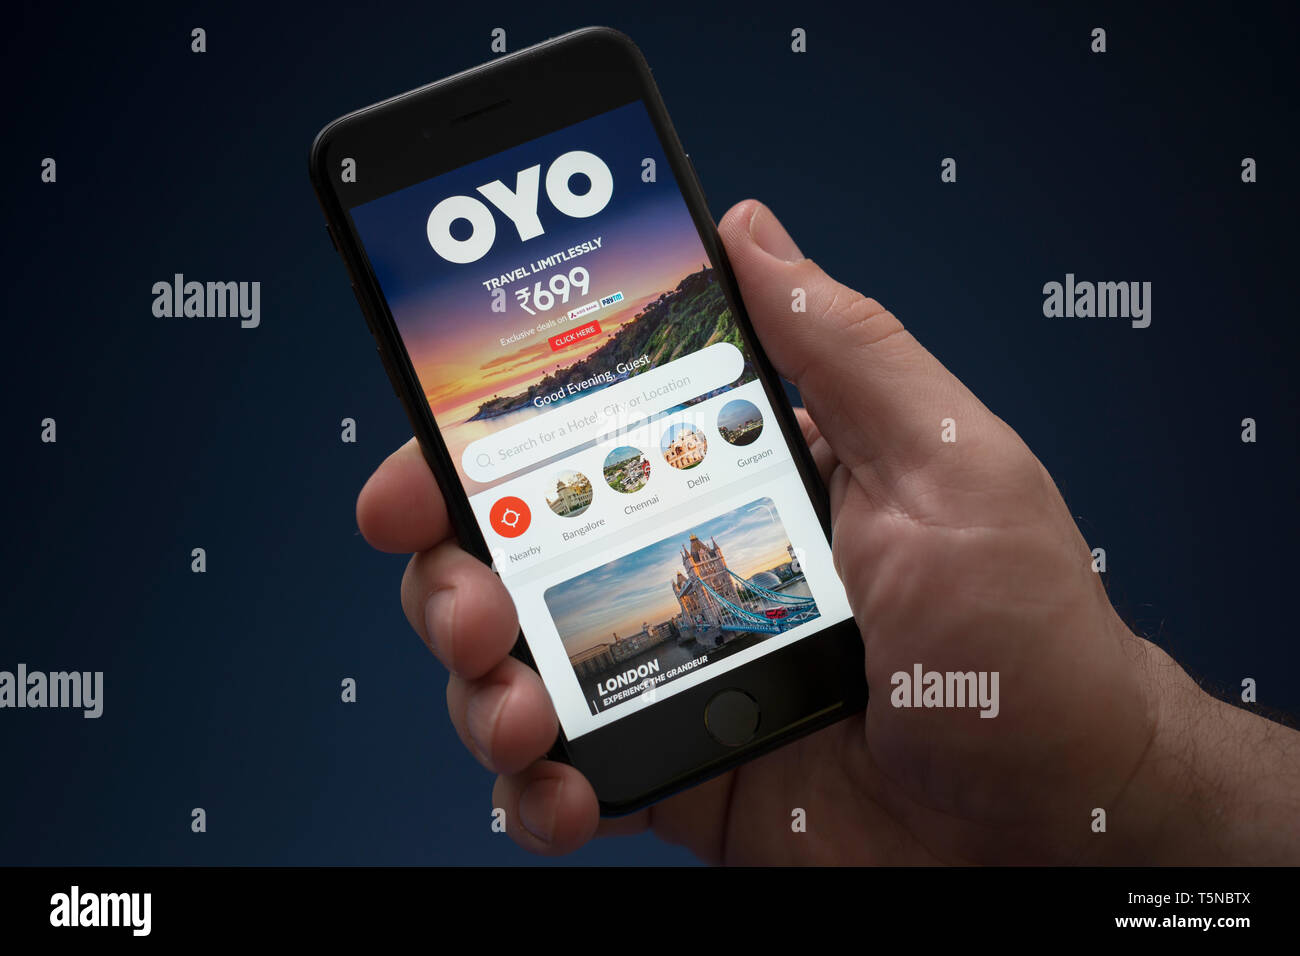 A man looks at his iPhone which displays the Oyo Rooms logo (Editorial use only). Stock Photo